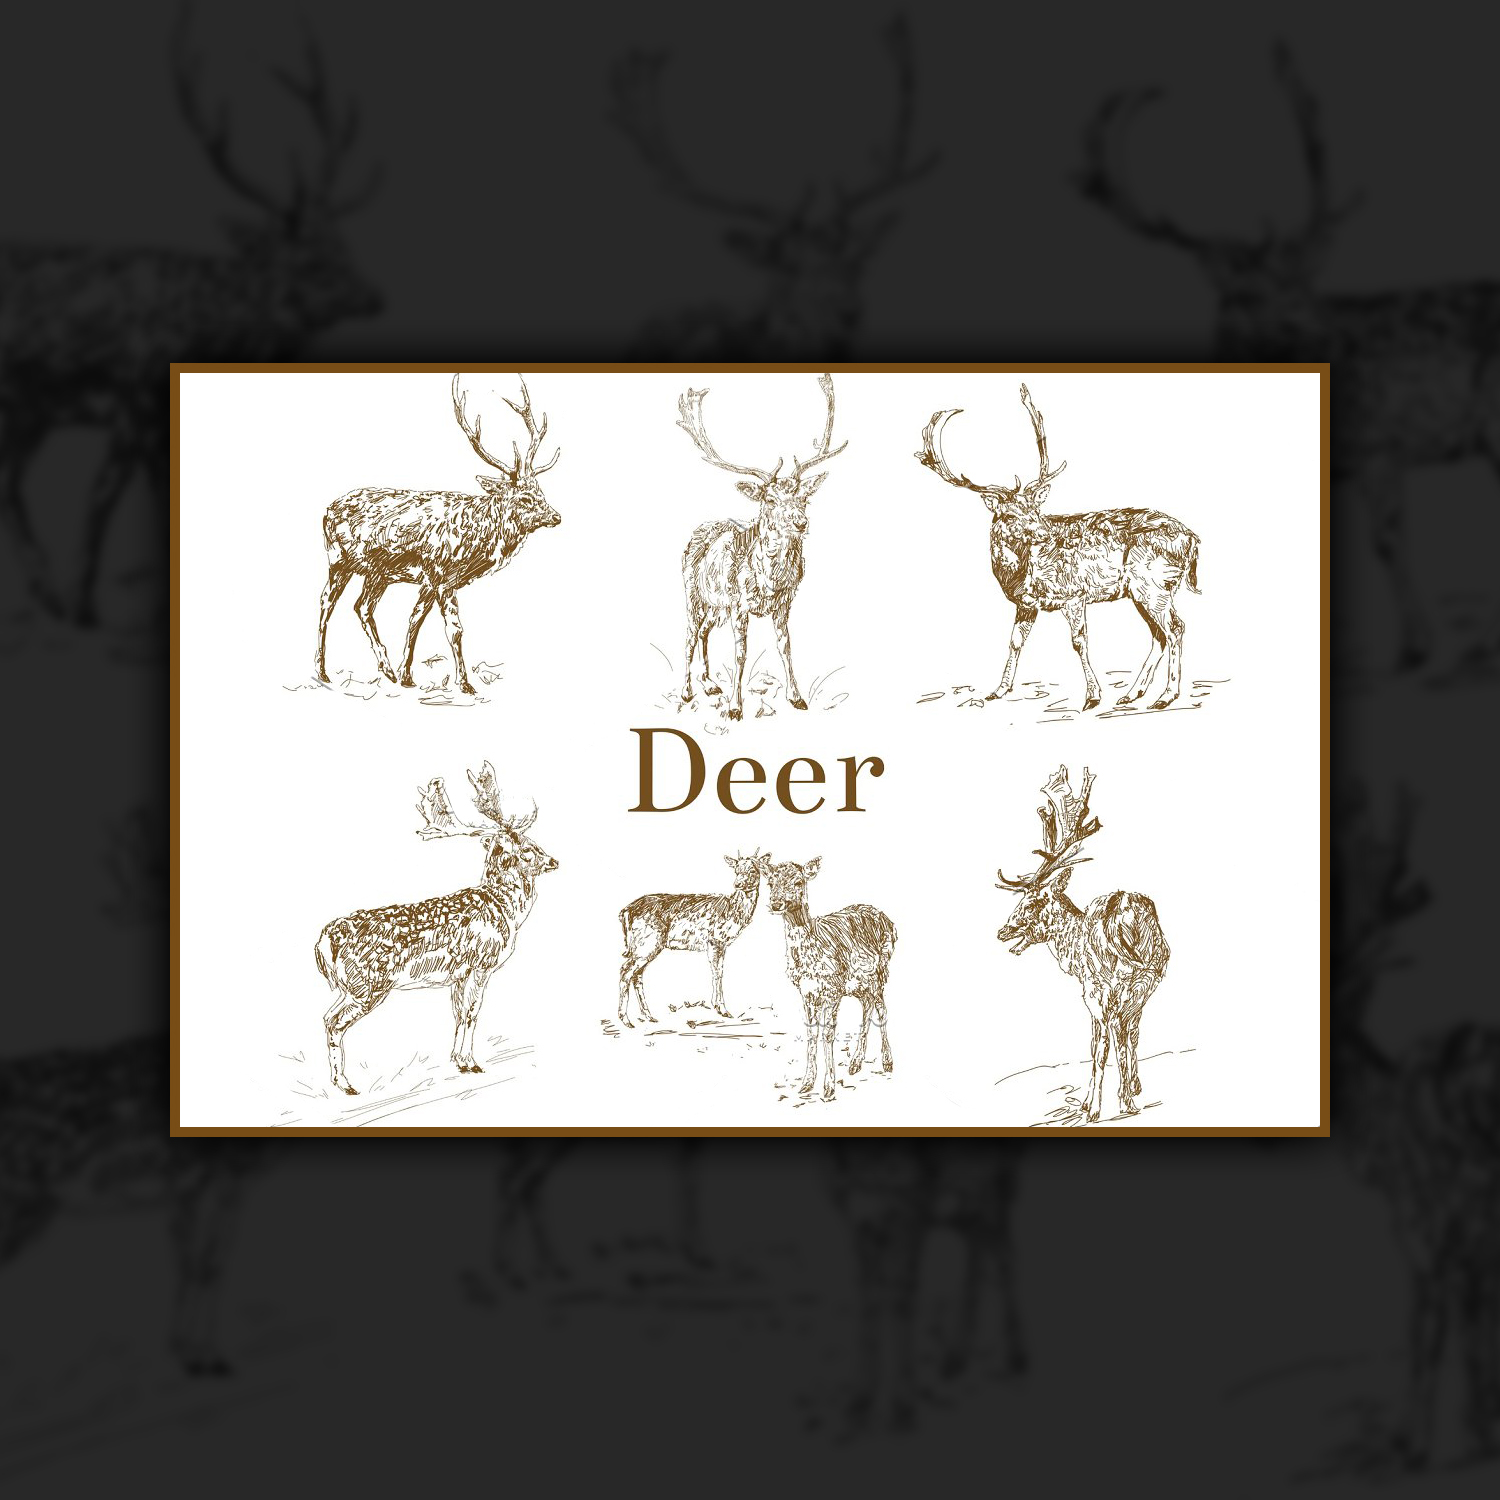 Images with christmas deer animals sketches.